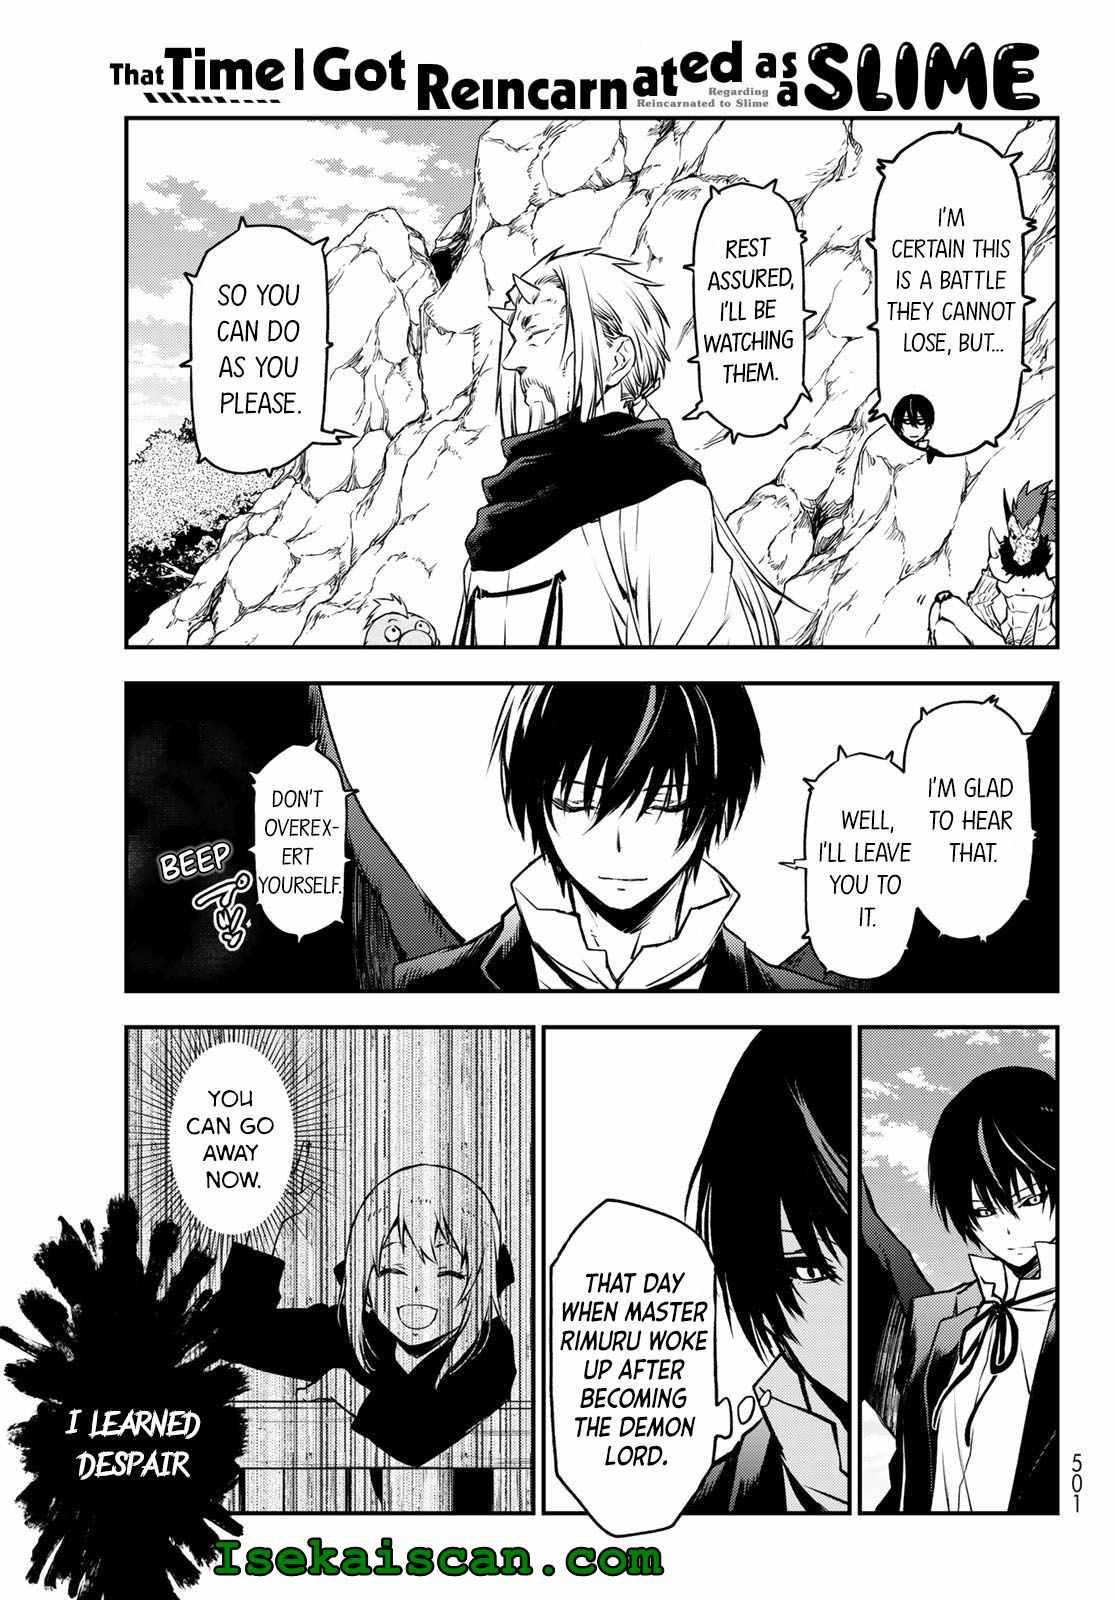 That Time I Got Reincarnated as a Slime, Chapter 94